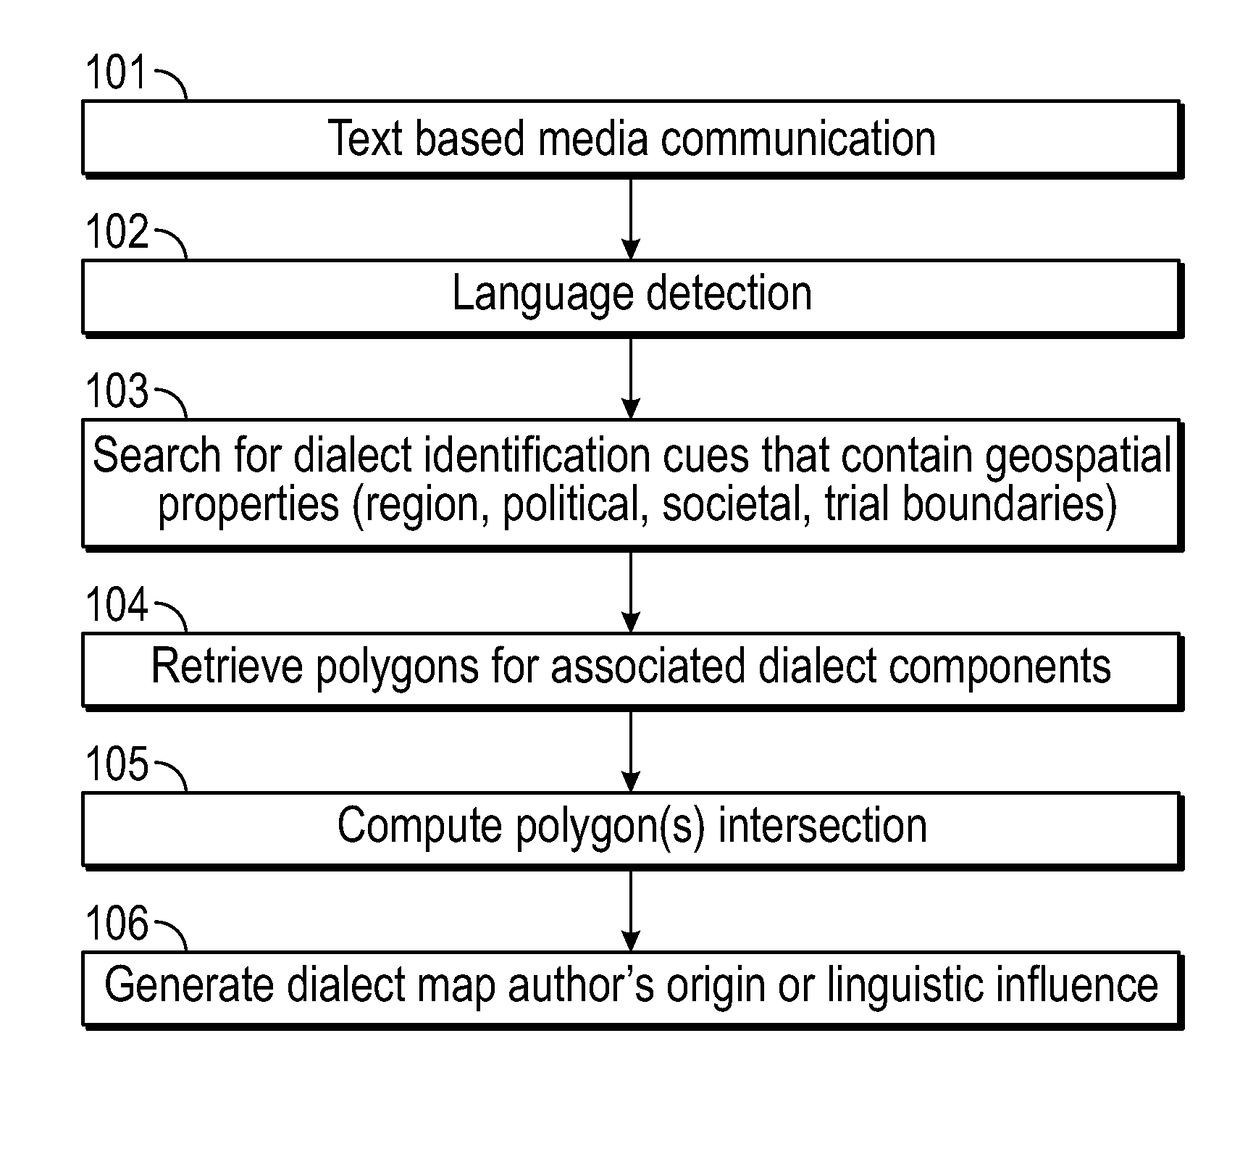 Geospatial Origin and Identity Based On Dialect Detection for Text Based Media